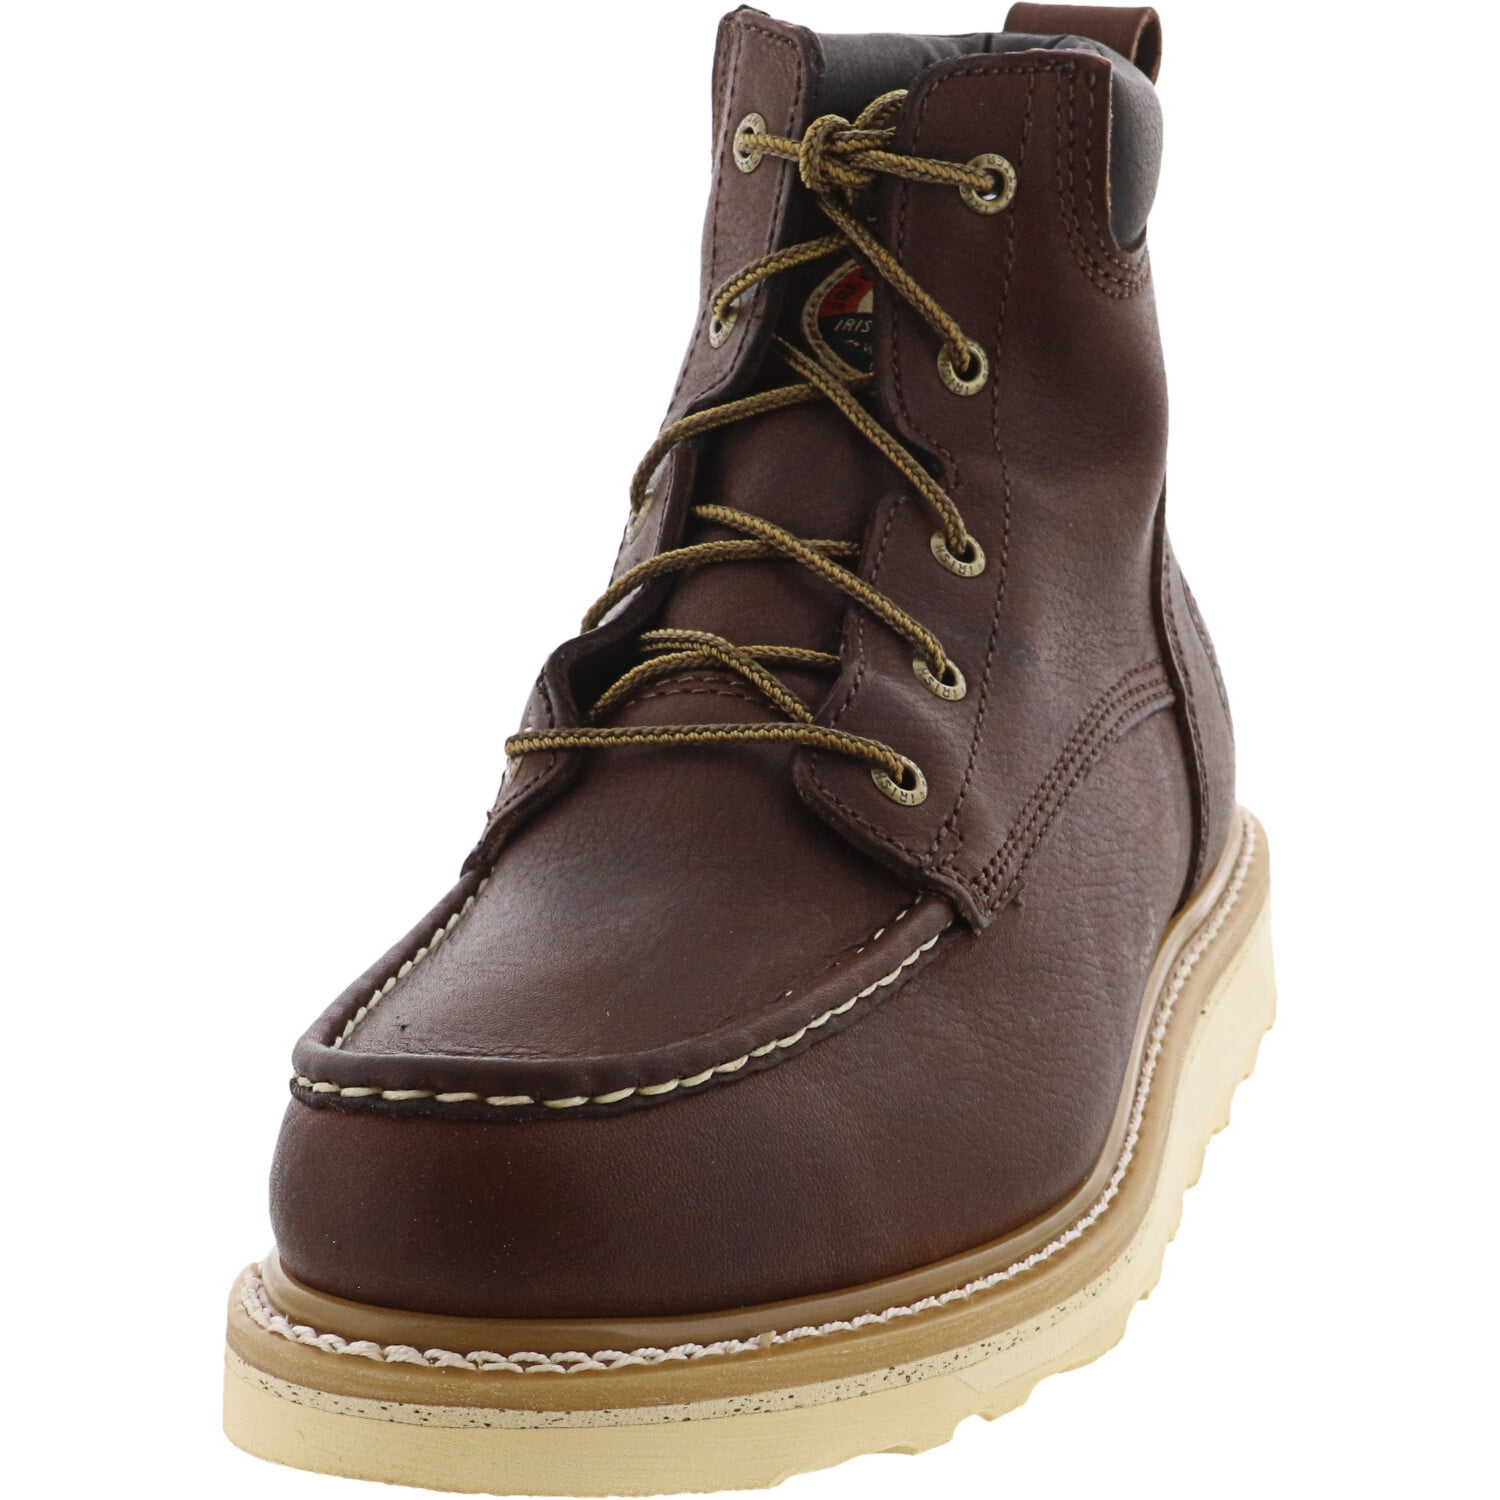 Irish Setter Men's Ashby Brown Ankle-High Leather Boot - 10.5M ...